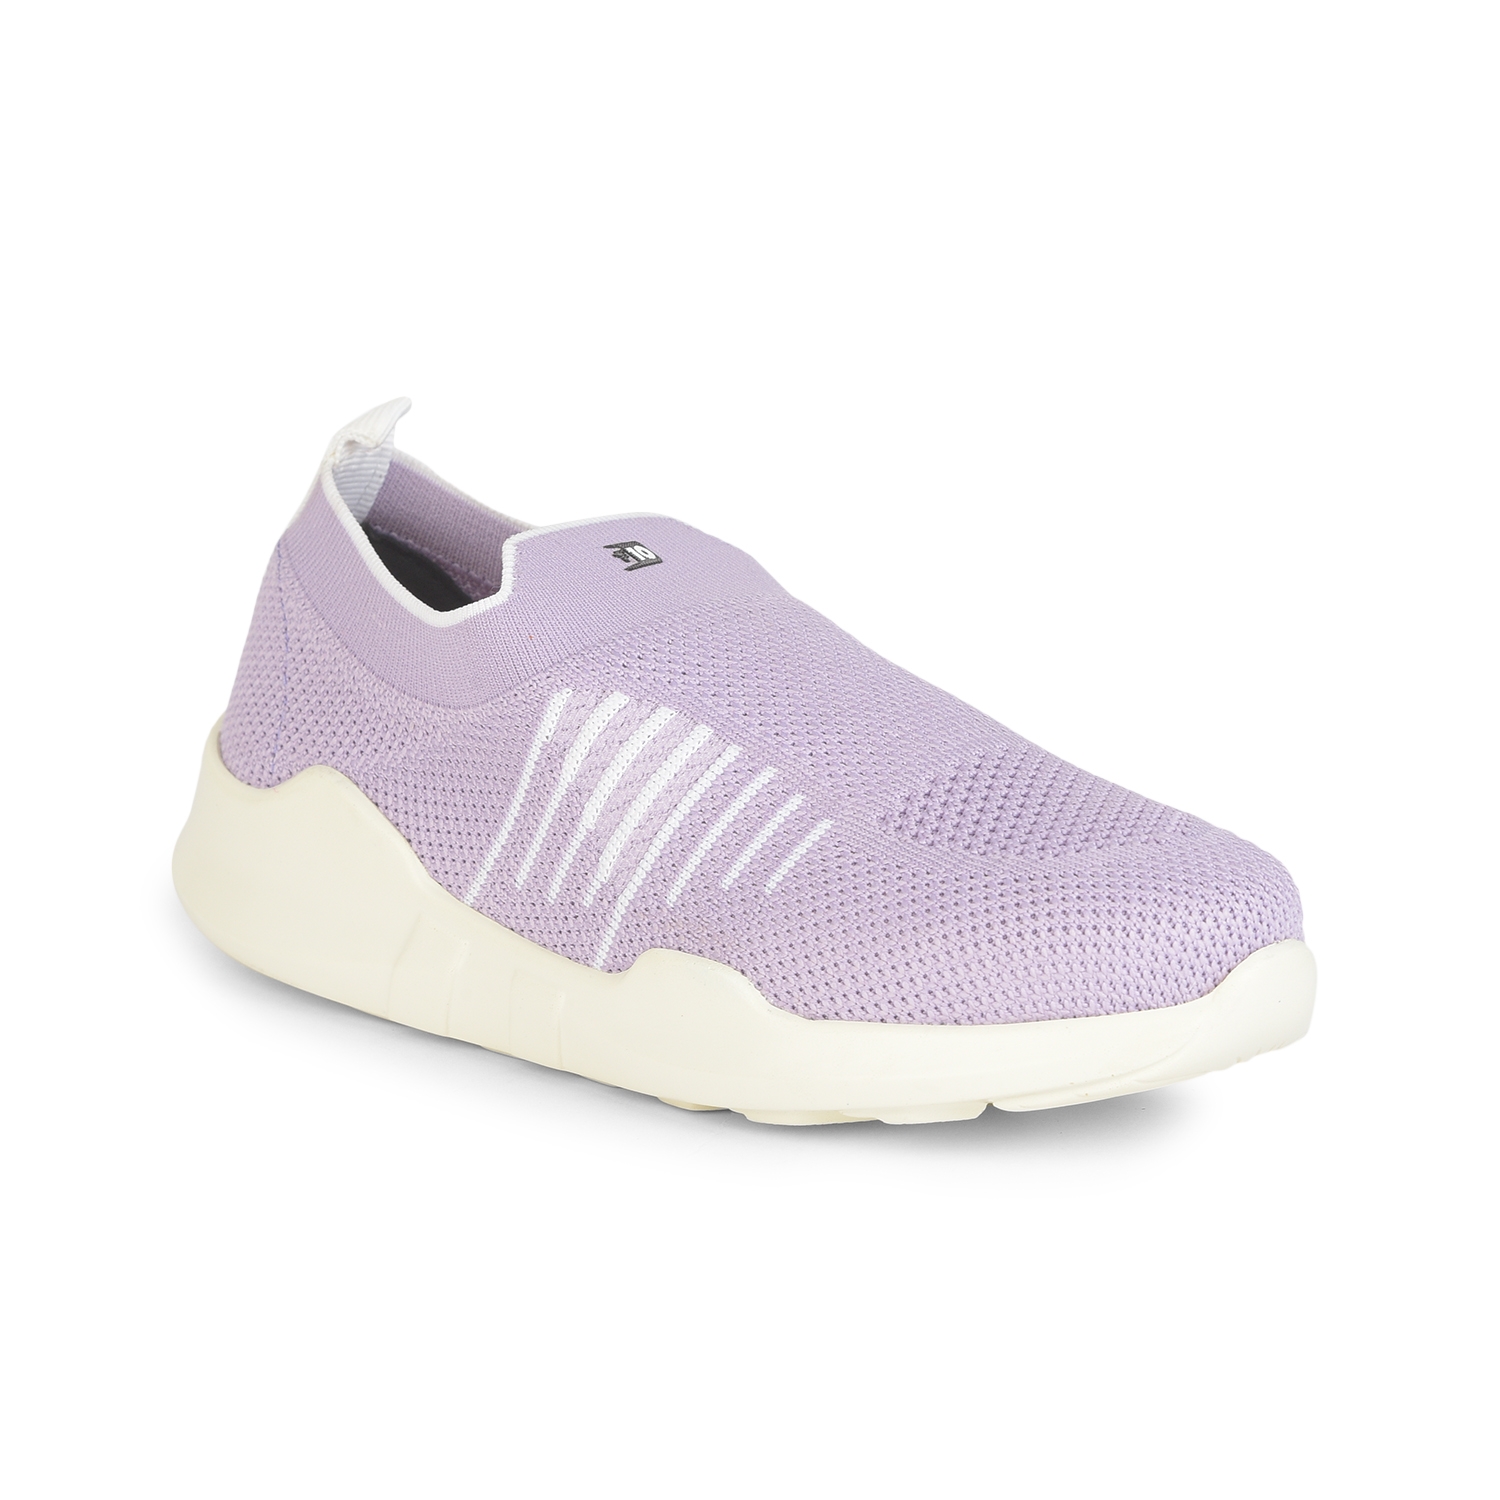 Liberty | Force 10 by Liberty Sports Shoes Purple AVILA-36 For :- Ladies